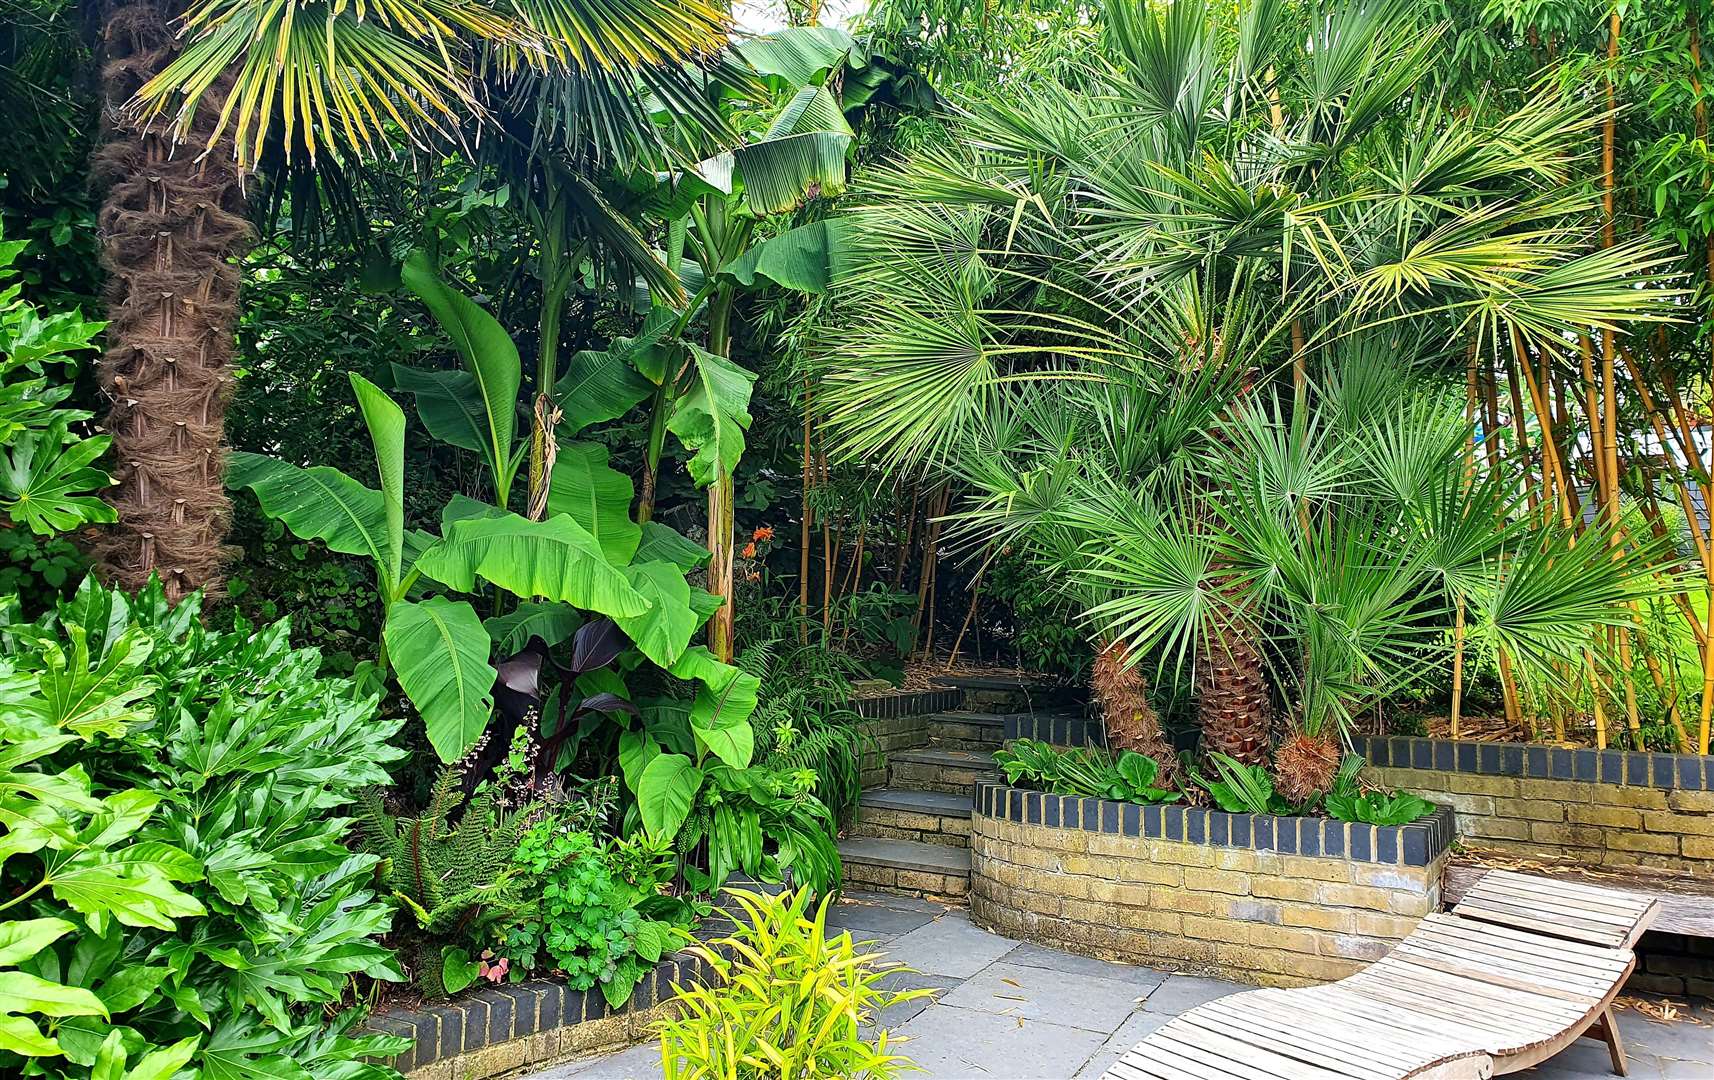 Tropical plants and a pool – who needs anything else? Picture: National Garden Scheme